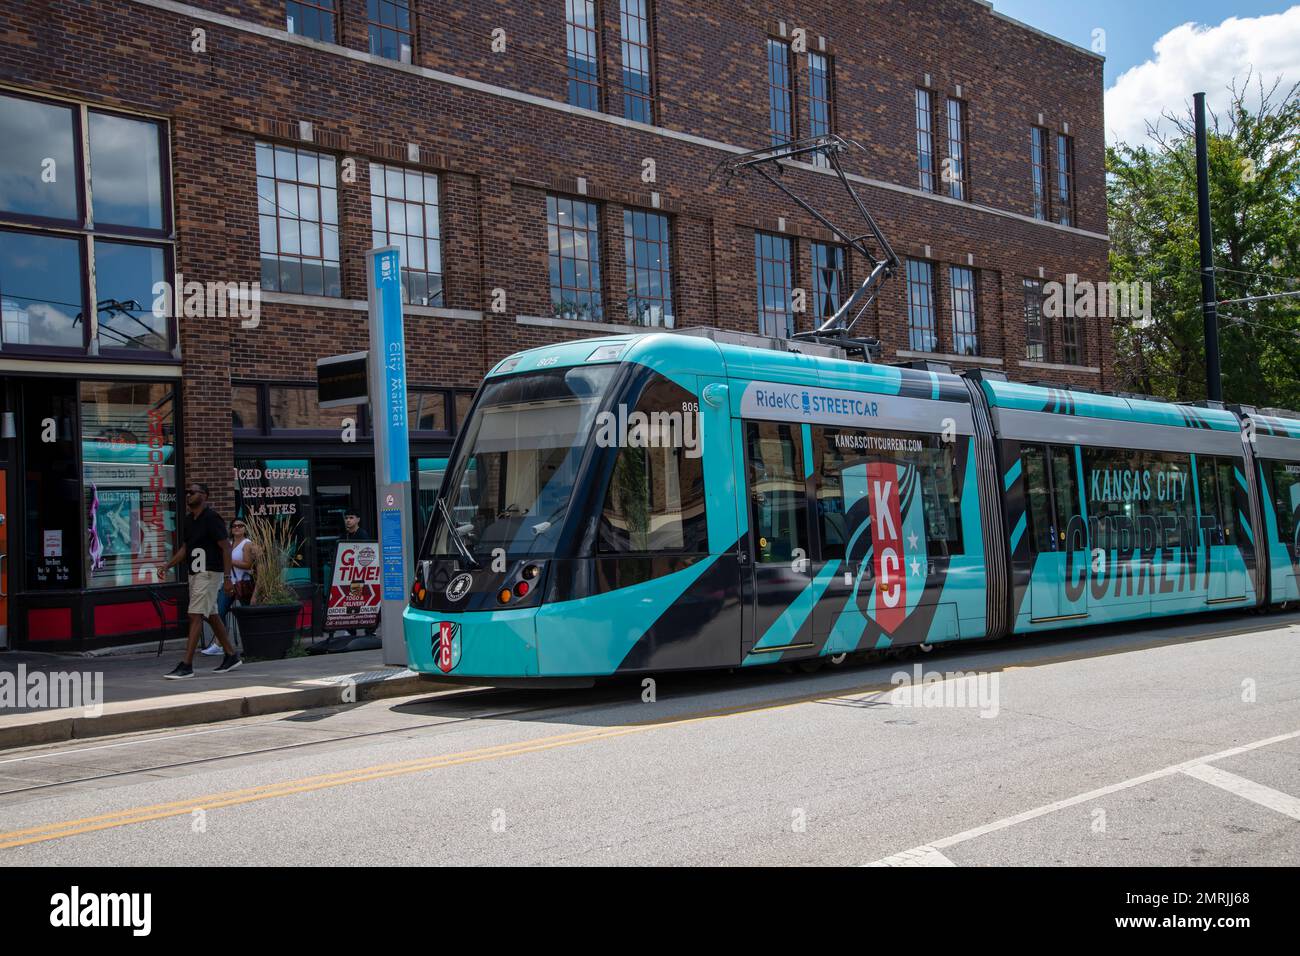 Kansas City, Missouri. The KC Streetcar is a free two-mile route running along Main Street in downtown KC connecting KC's River Market area to Crown C Stock Photo